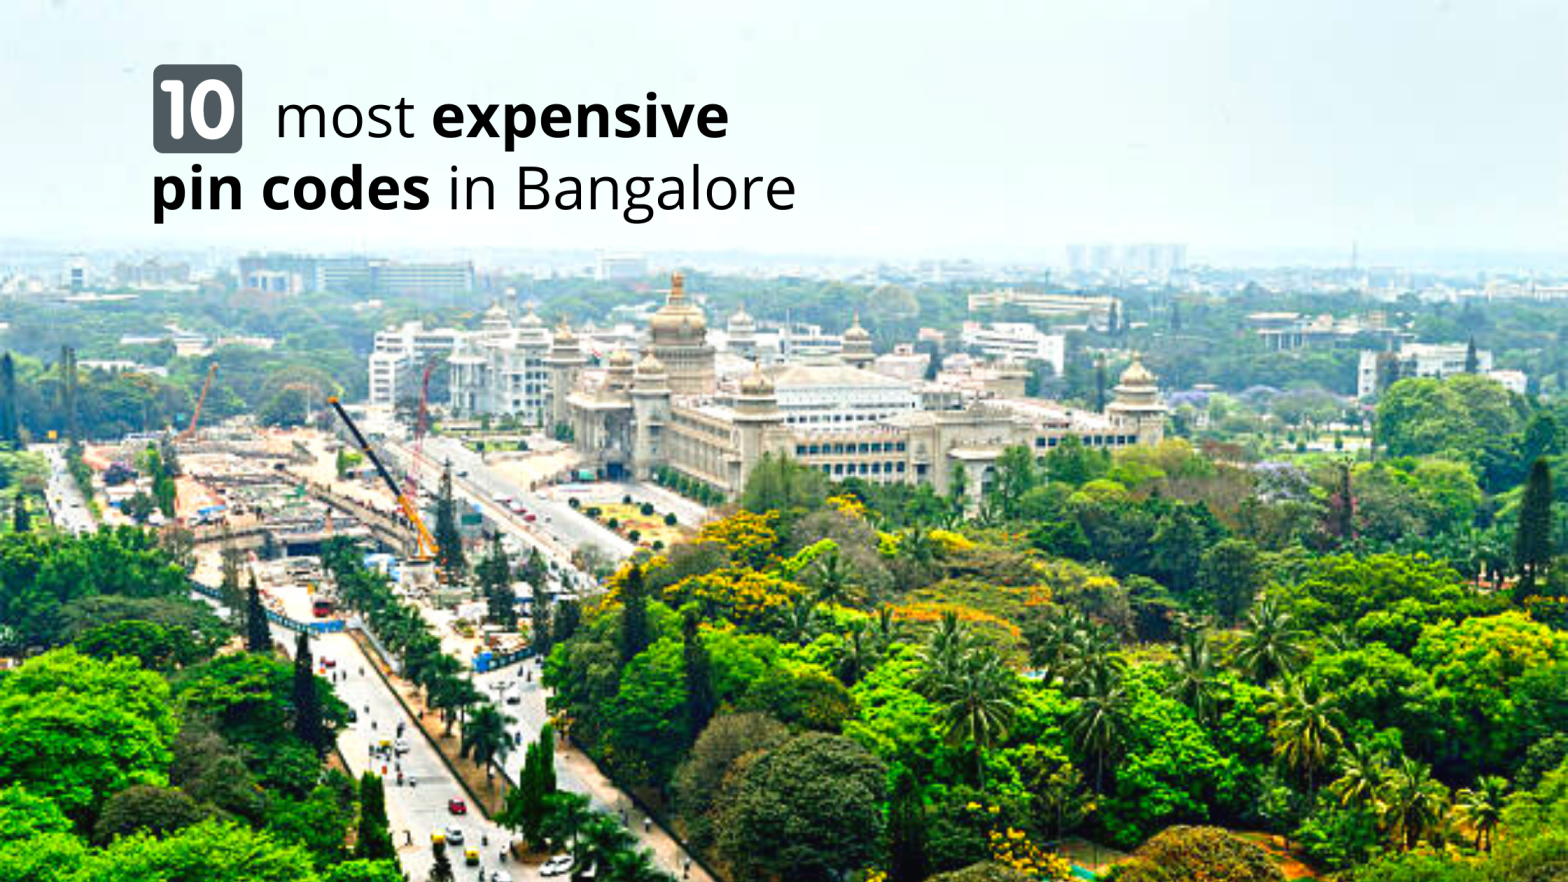 10 most expensive pin codes to buy a home in Bangalore